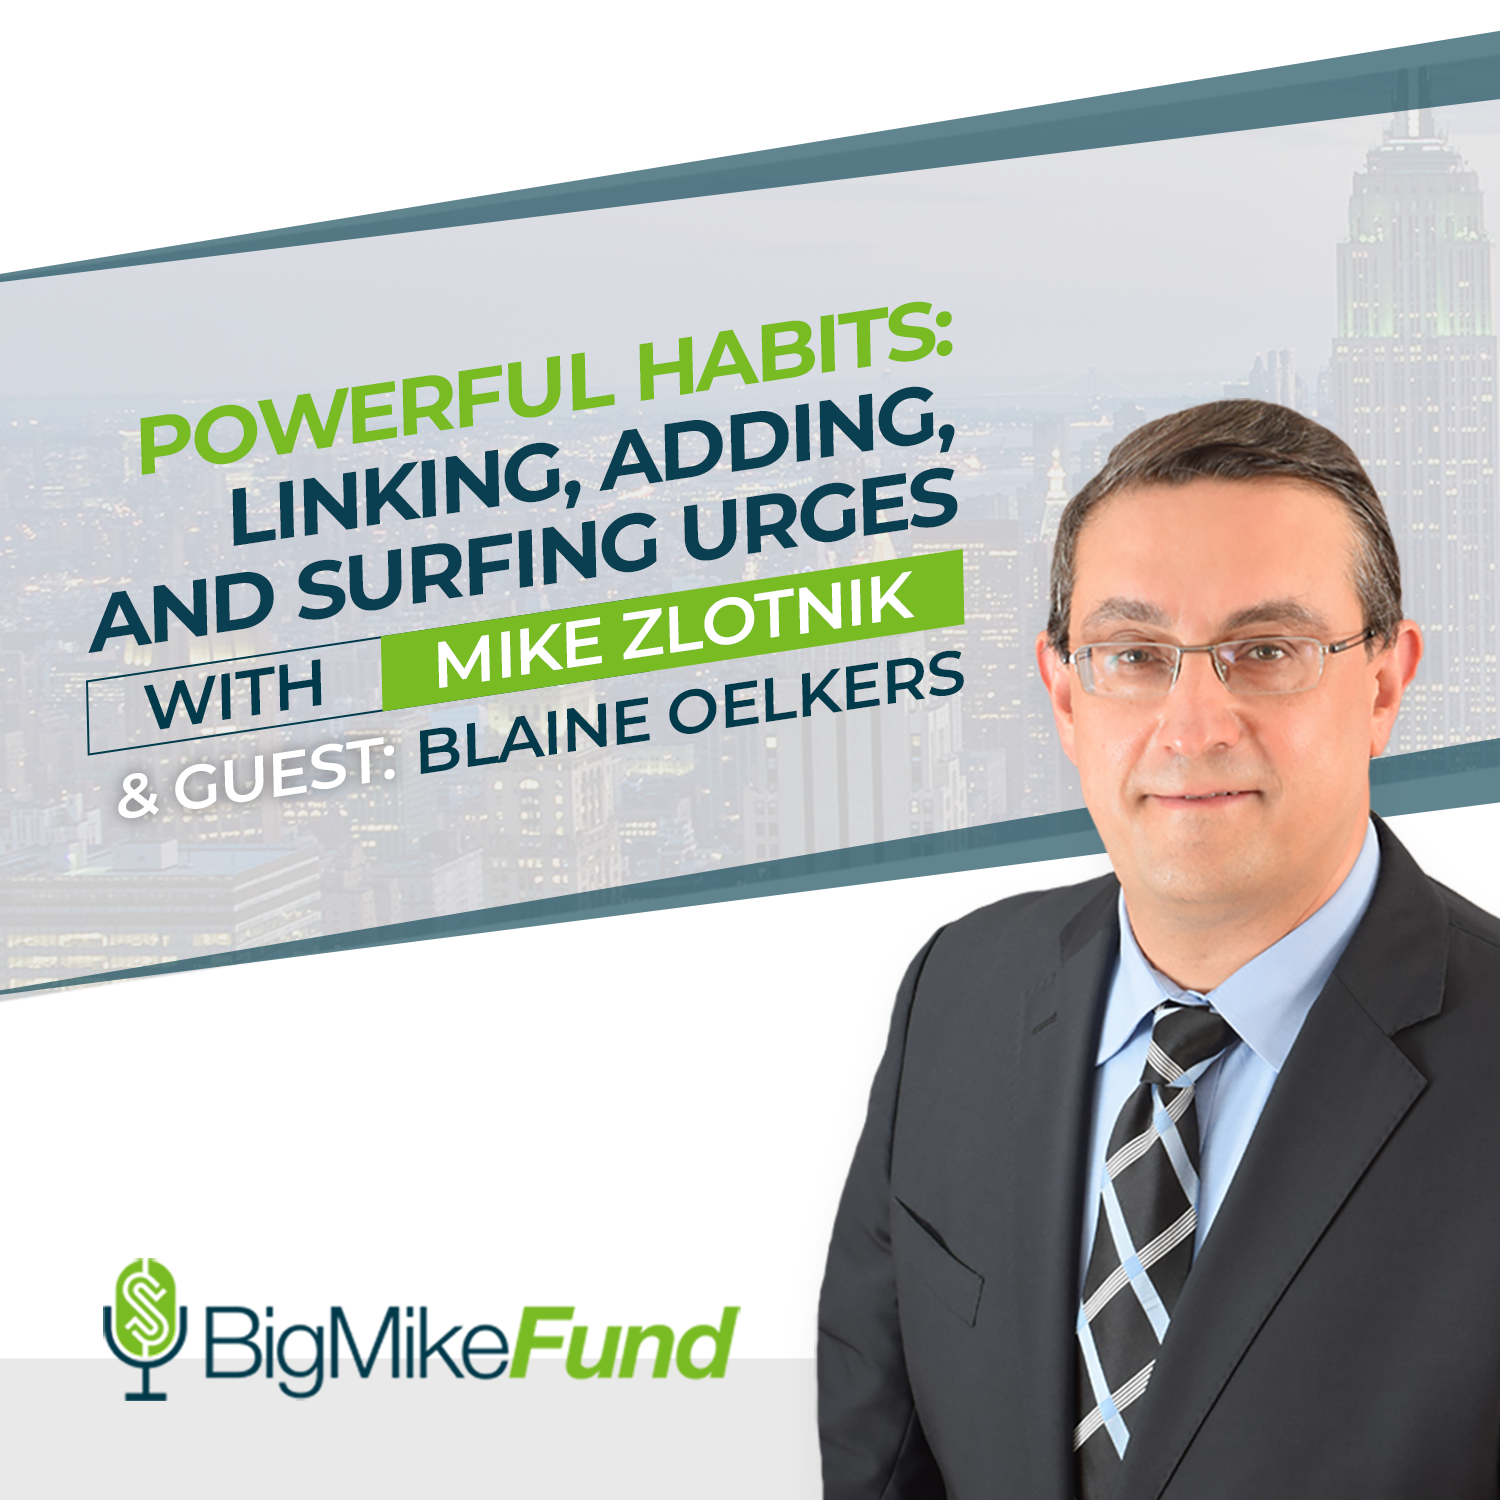 120: Powerful Habits: Linking, Adding, and Surfing Urges with Blaine Oelkers